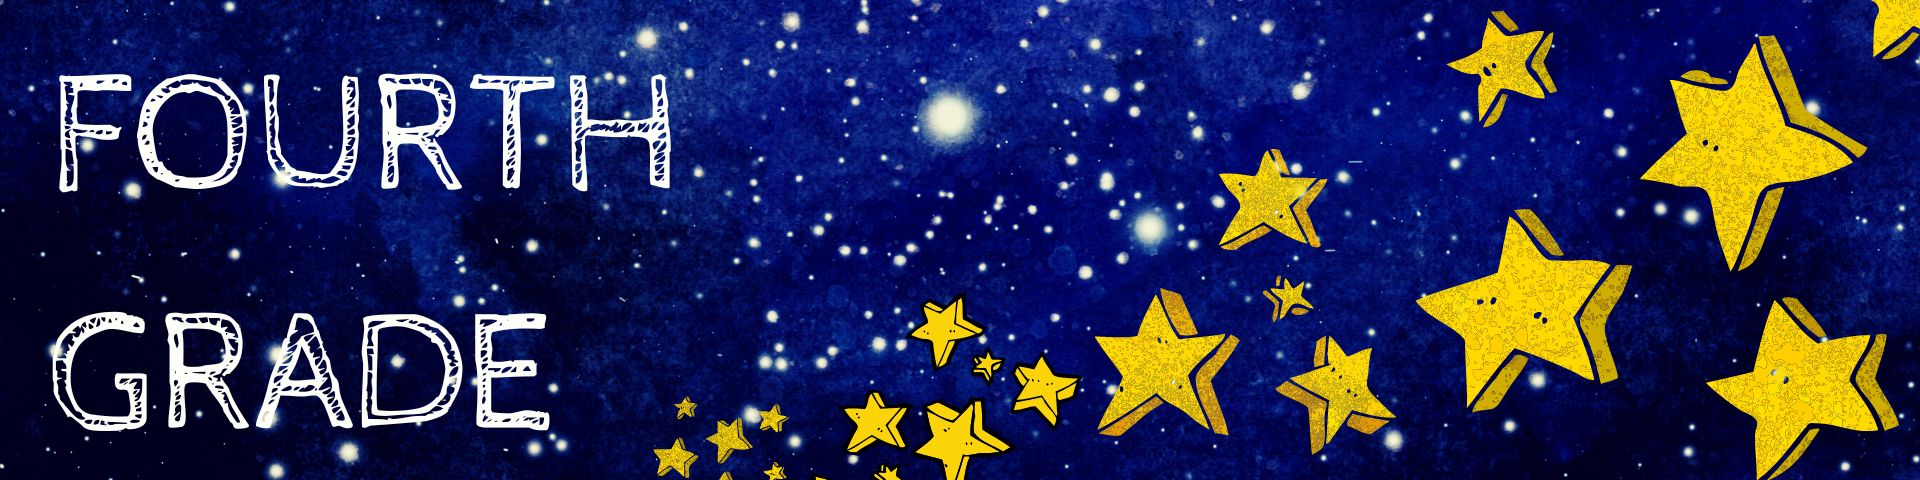 4th grade with stars and night sky background